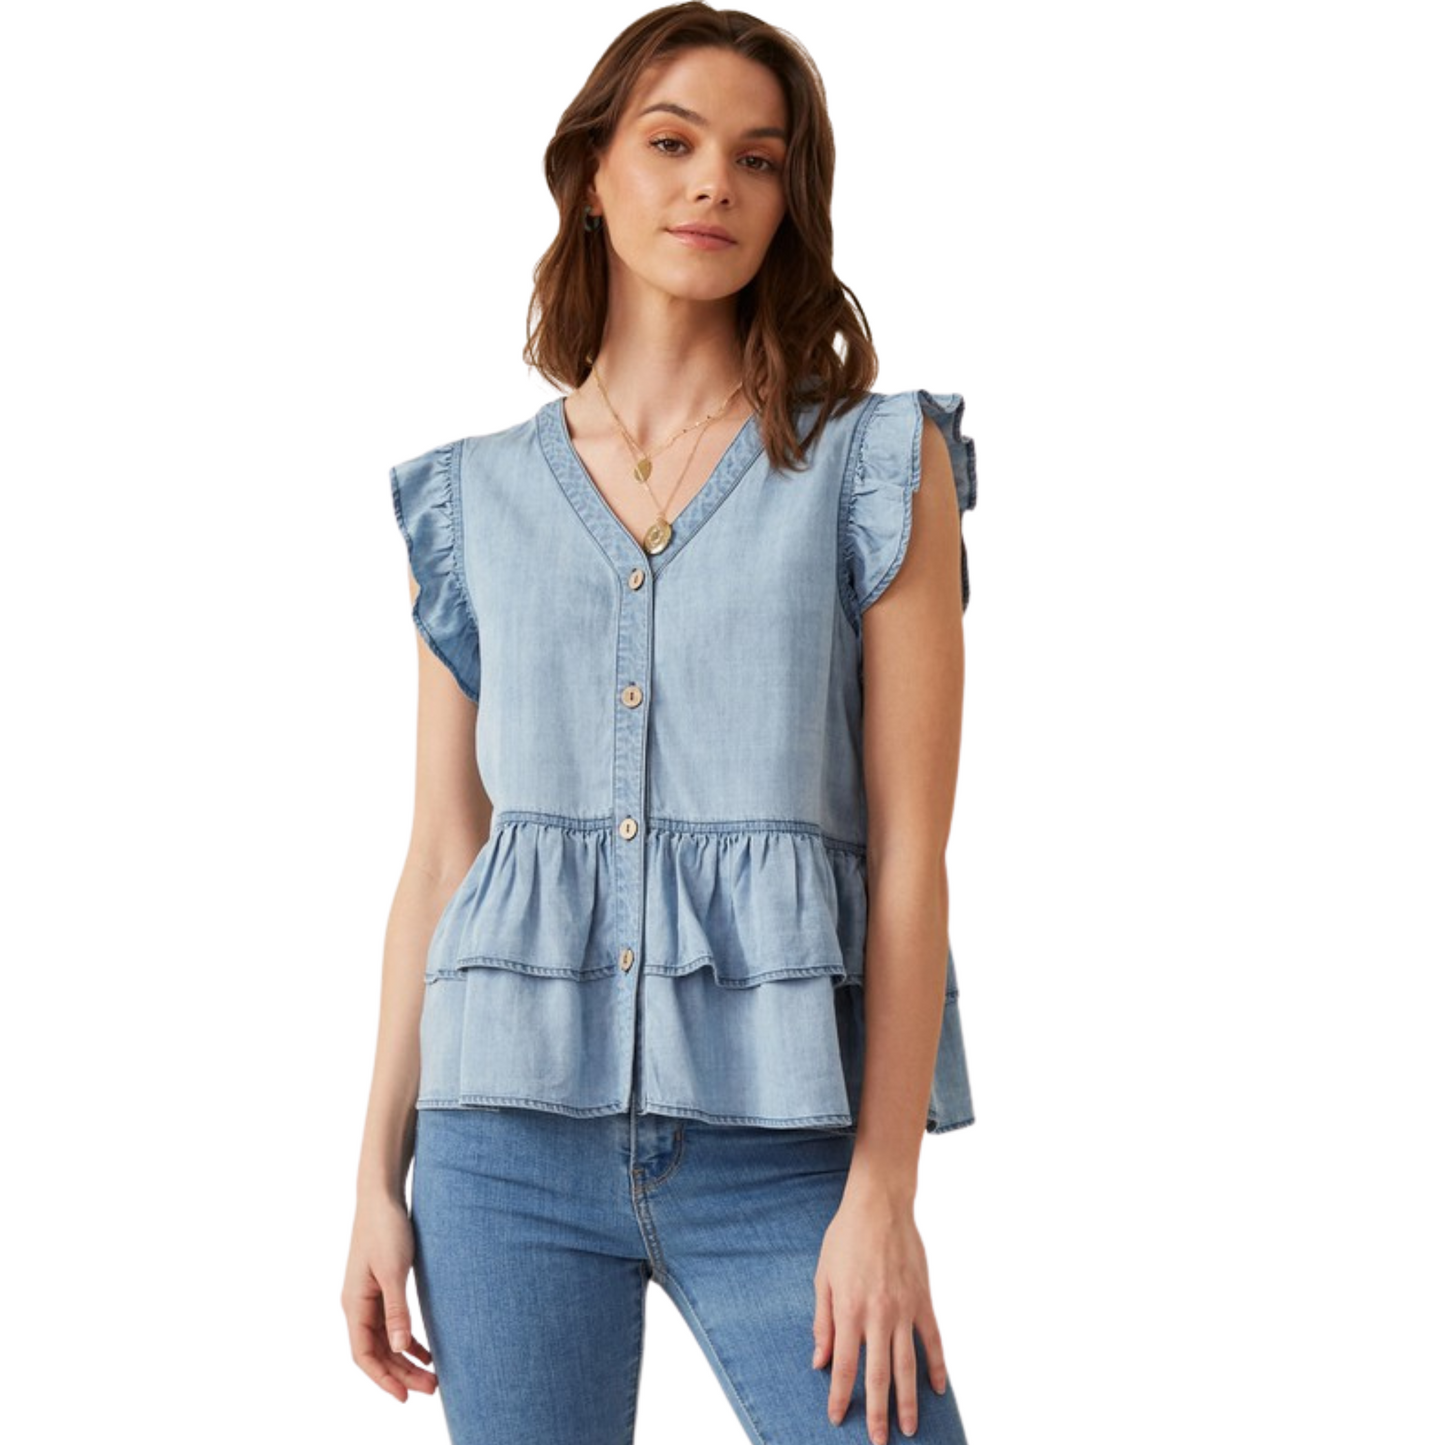 This Ruffled Denim Top is crafted from lightweight woven denim fabric with enriching button and ruffle details. Perfectly stylish and designed to flatter, it's an excellent choice for any warm weather ensemble.